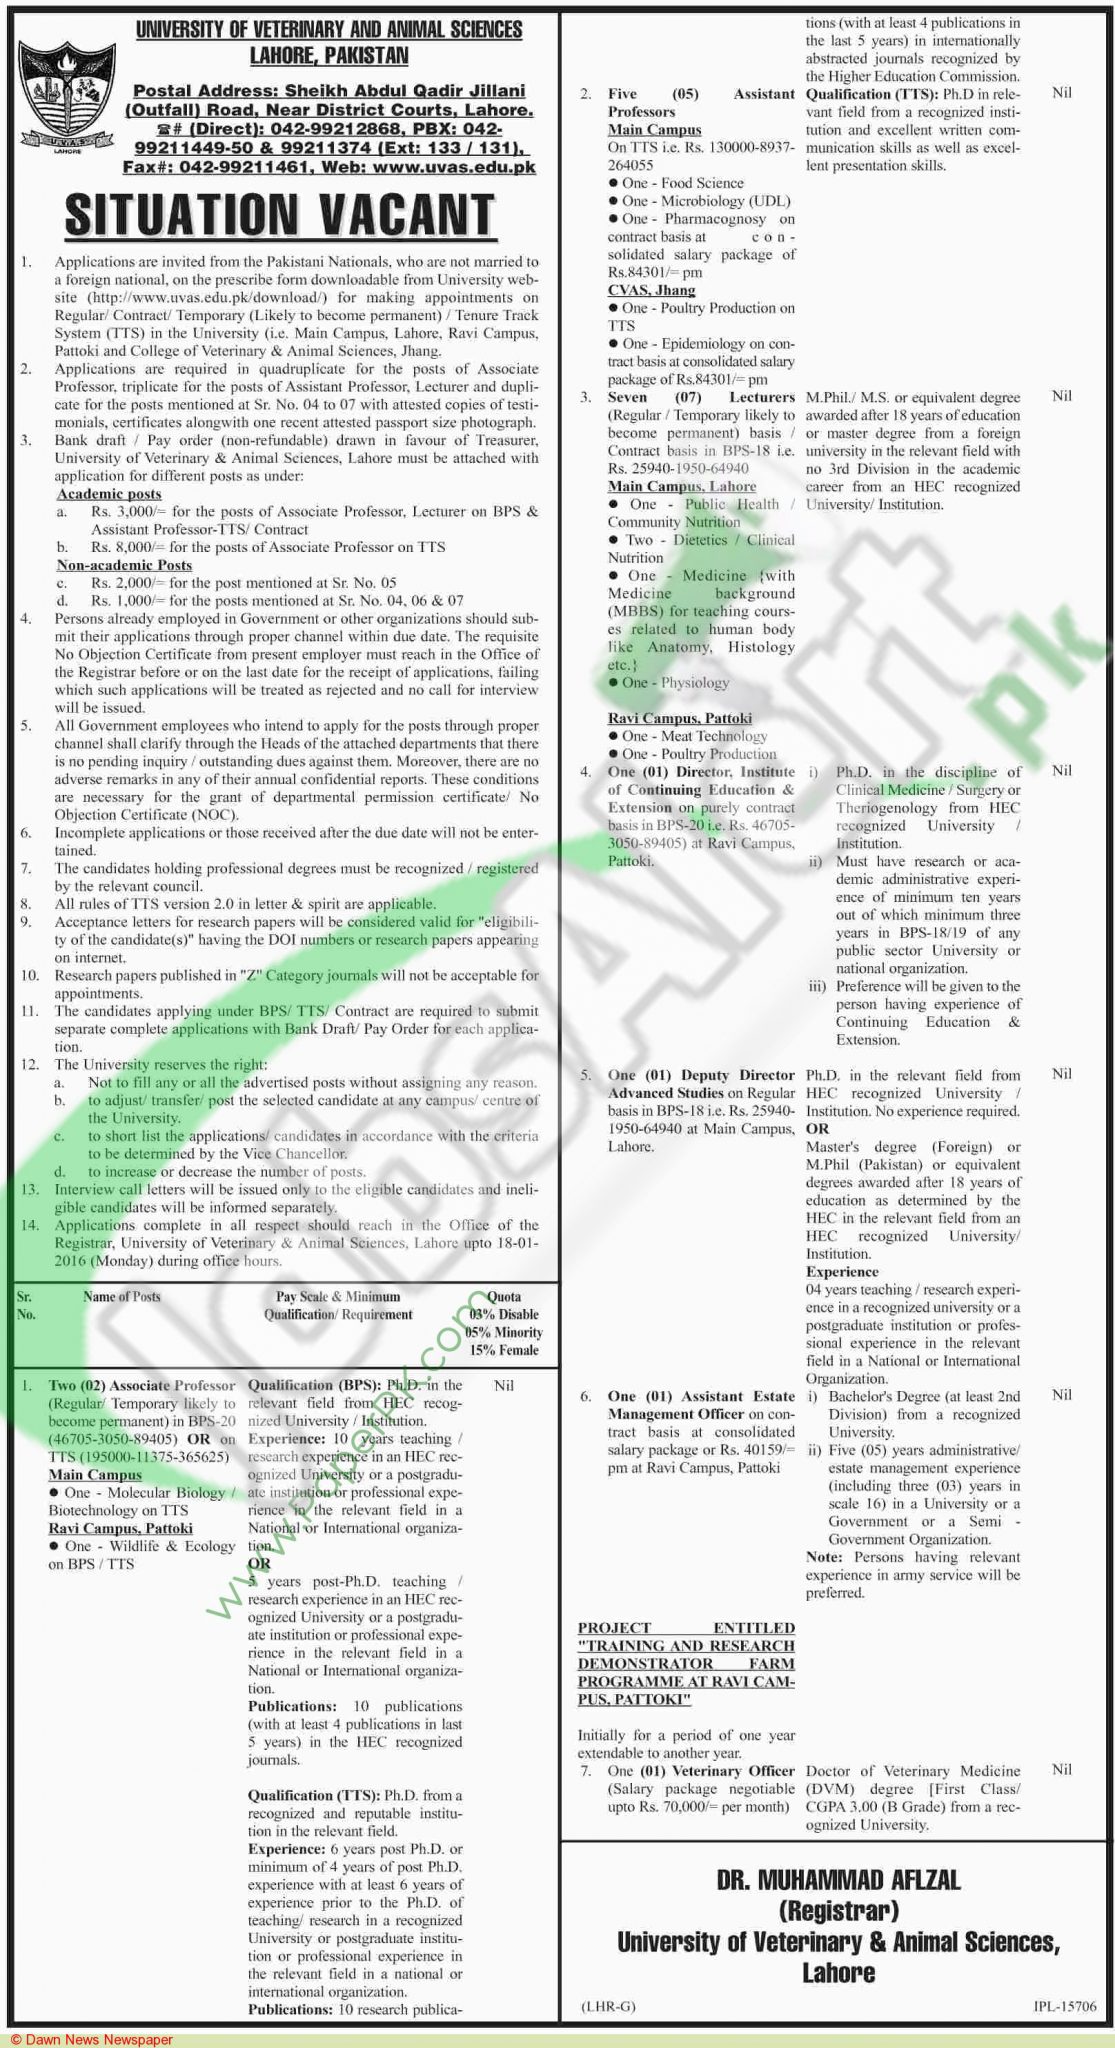 University of Veterinary and Animal Sciences Lahore Career Opportunities